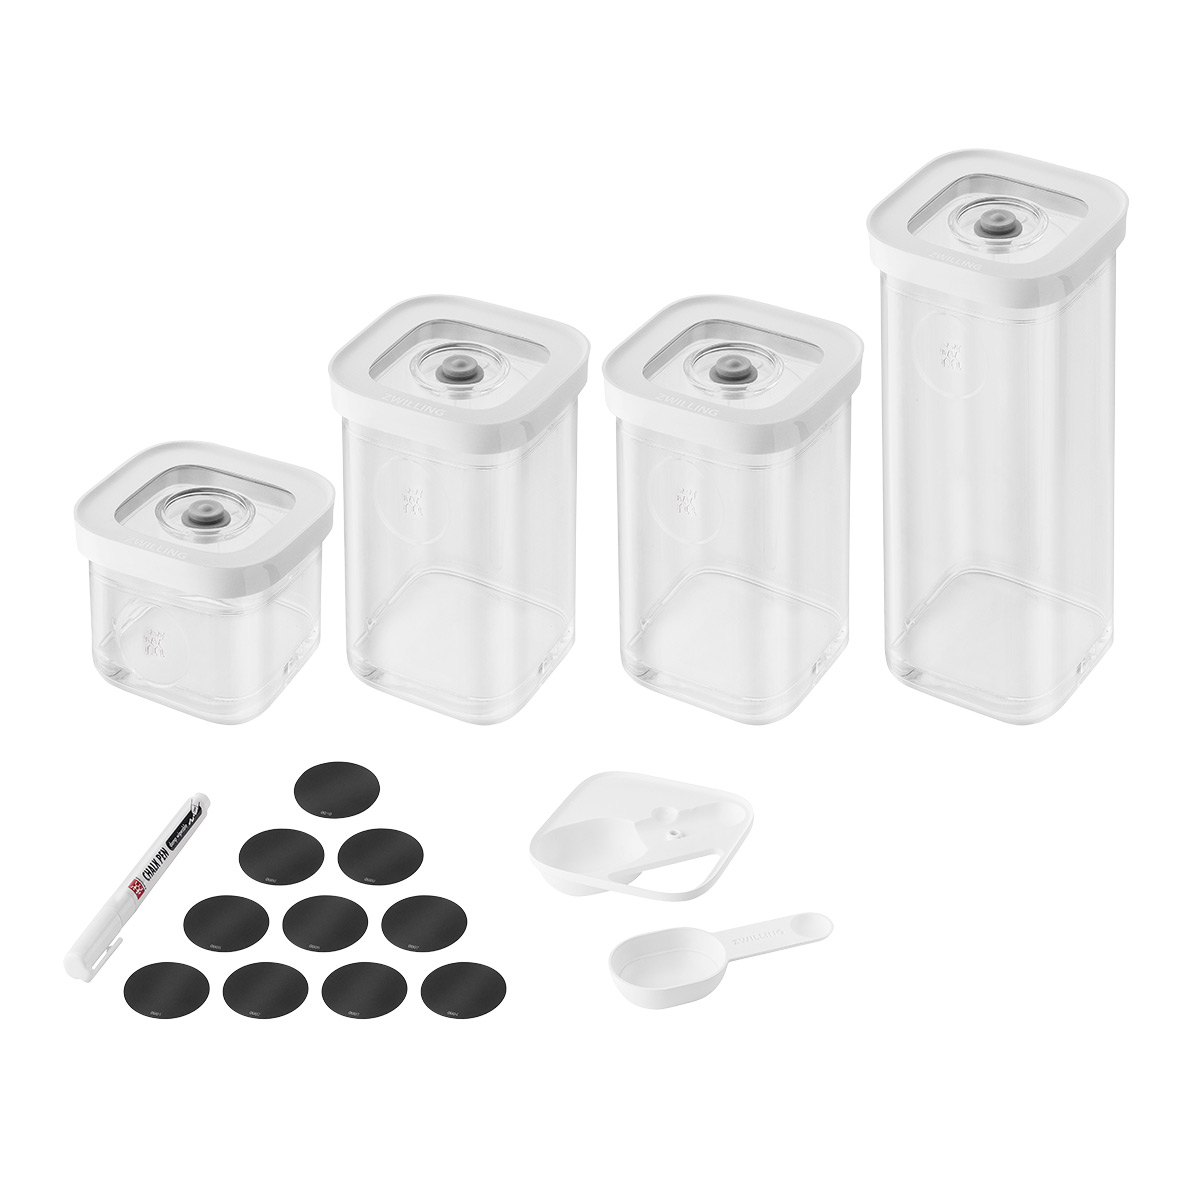 https://www.containerstore.com/catalogimages/498274/10095983-1025971_01-zwilling-cube-se.jpg